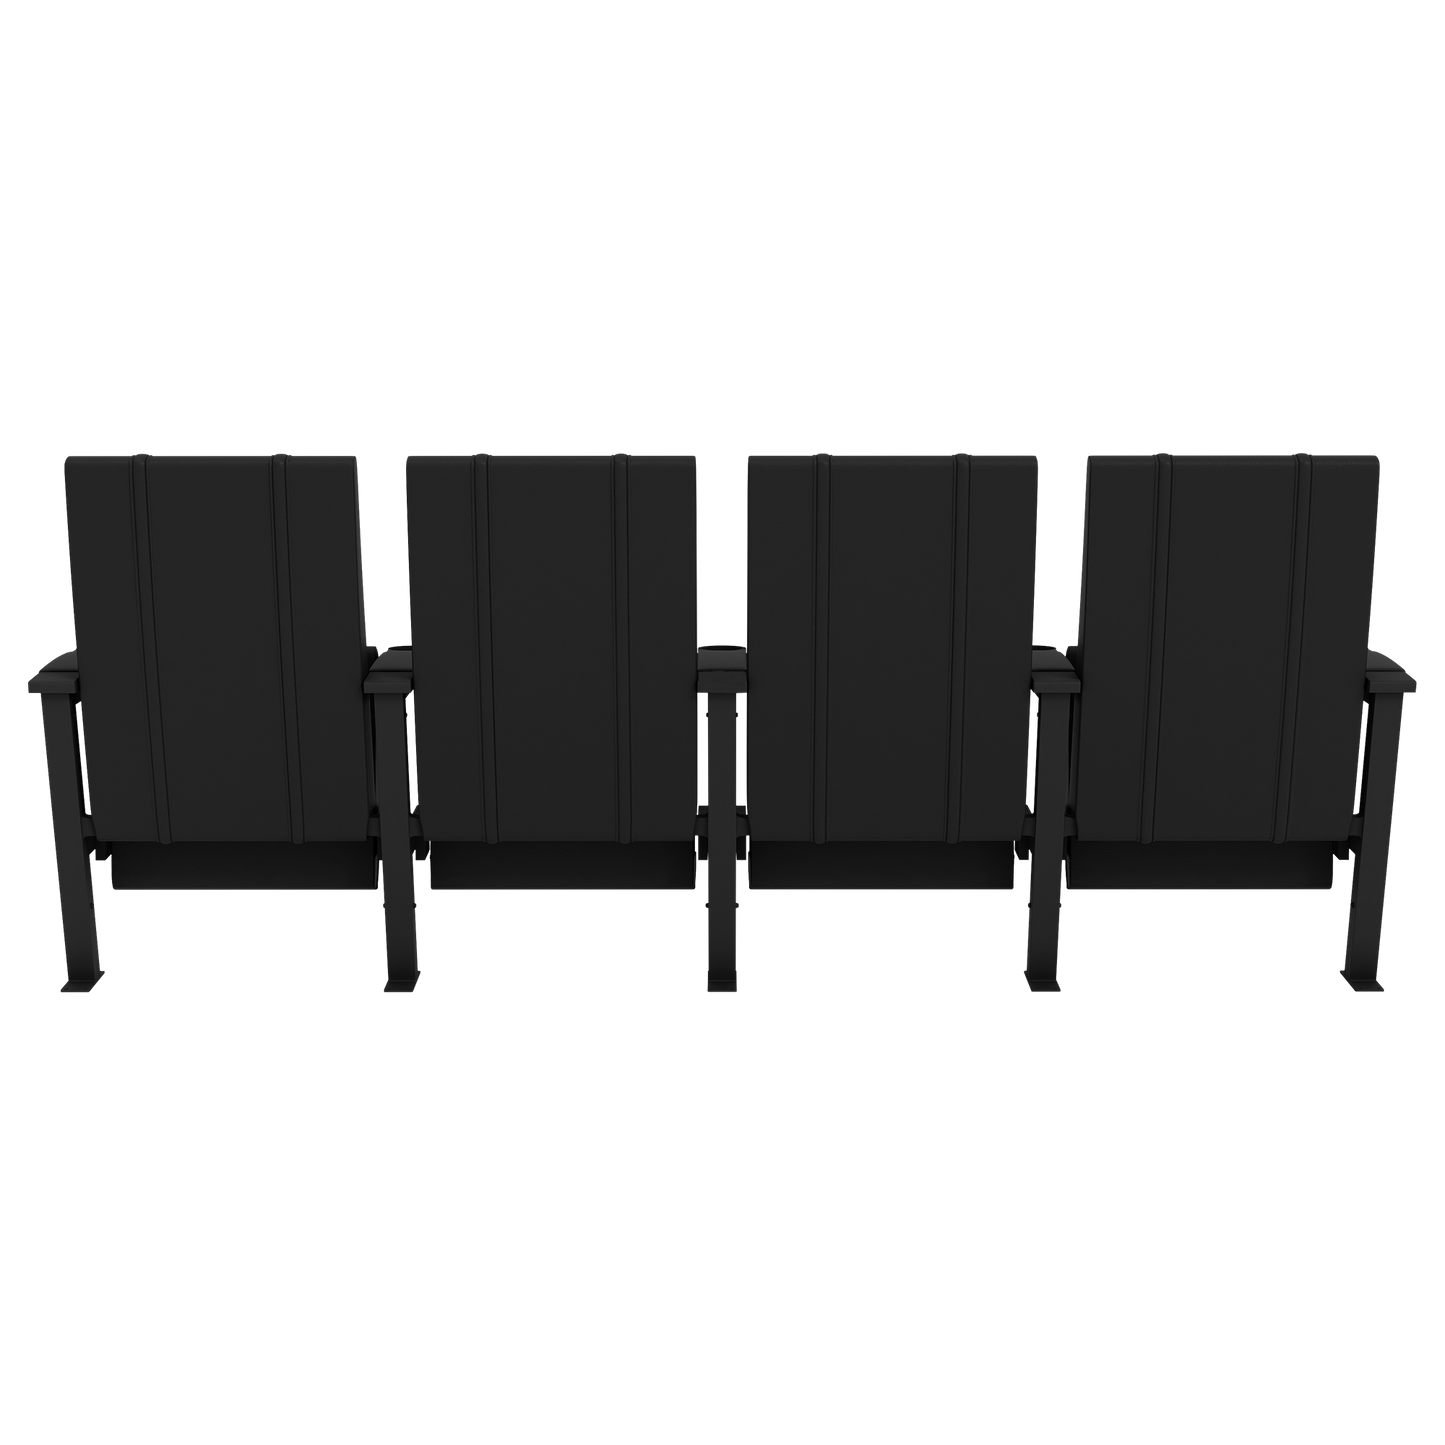 SuiteMax 3.5 VIP Seats with New Jersey Devils Logo